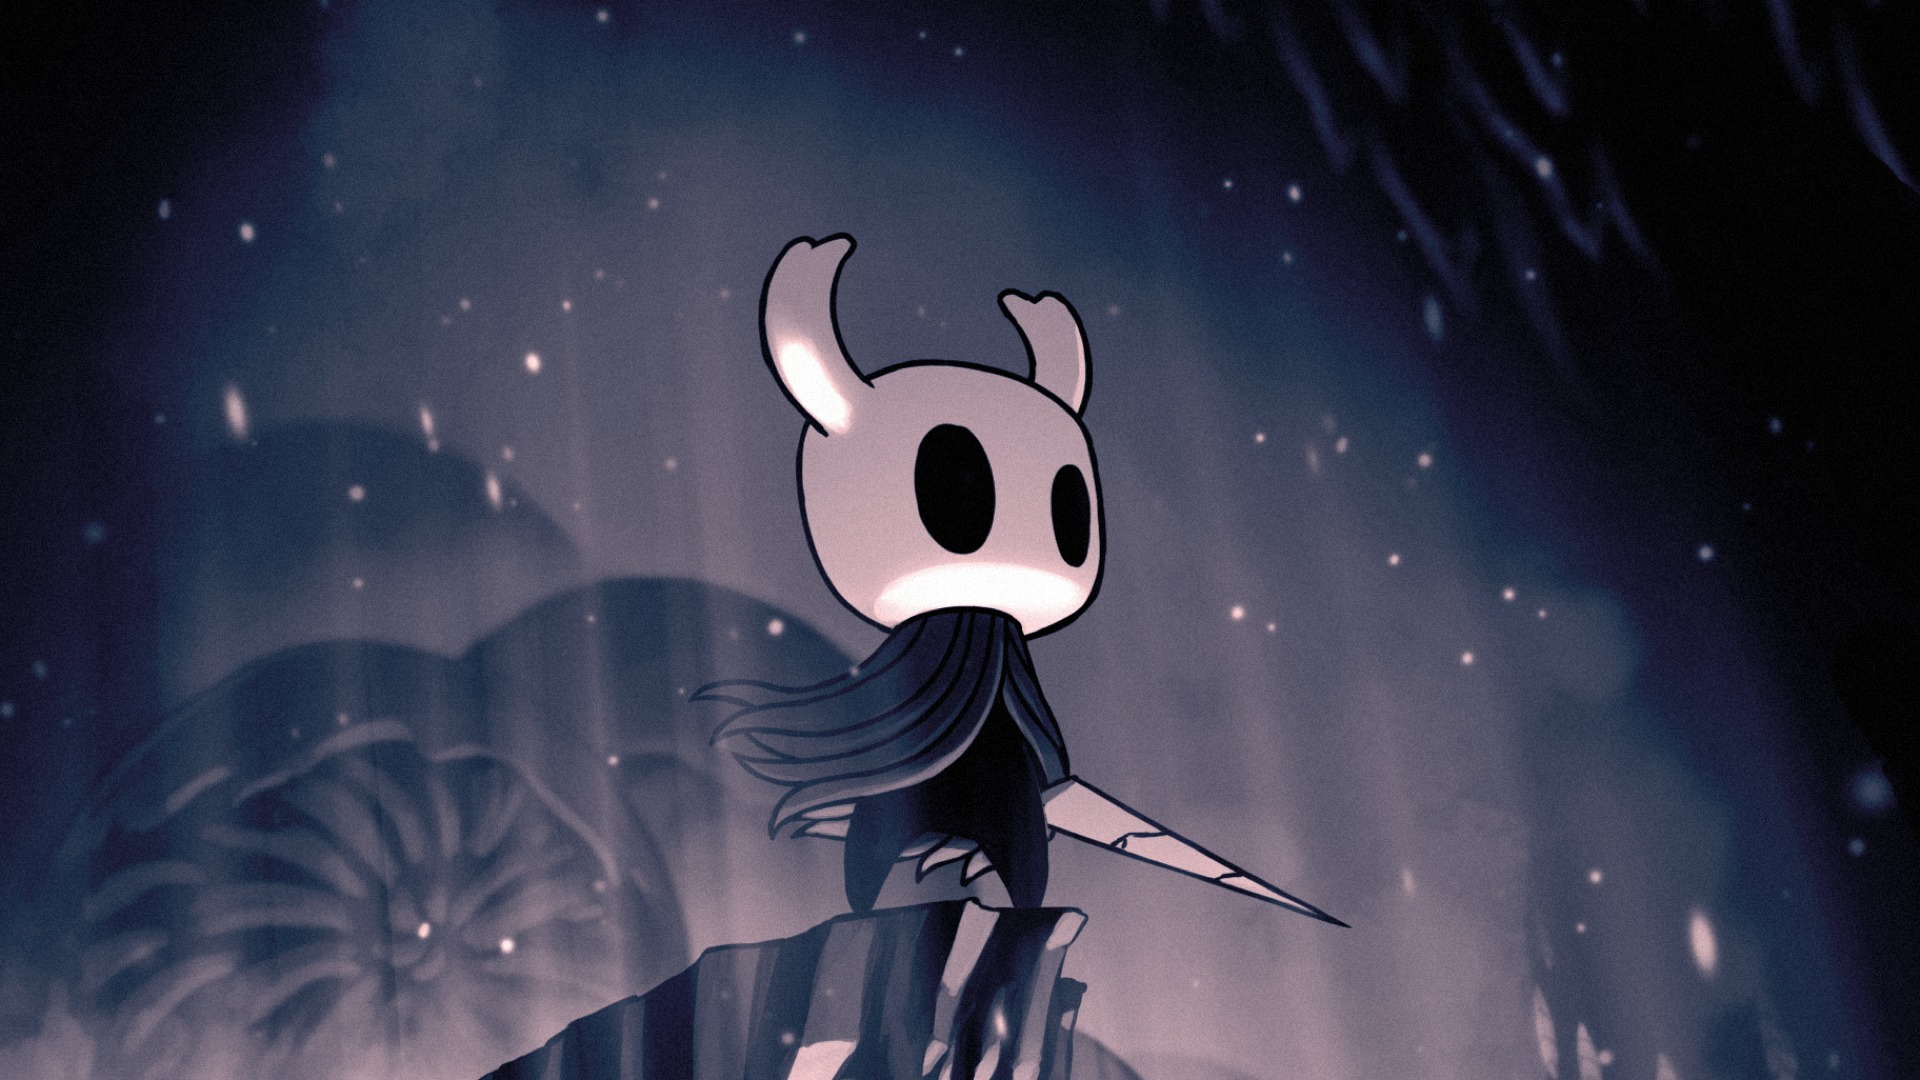 dawn sherwin recommends Hollow Knight Xxx